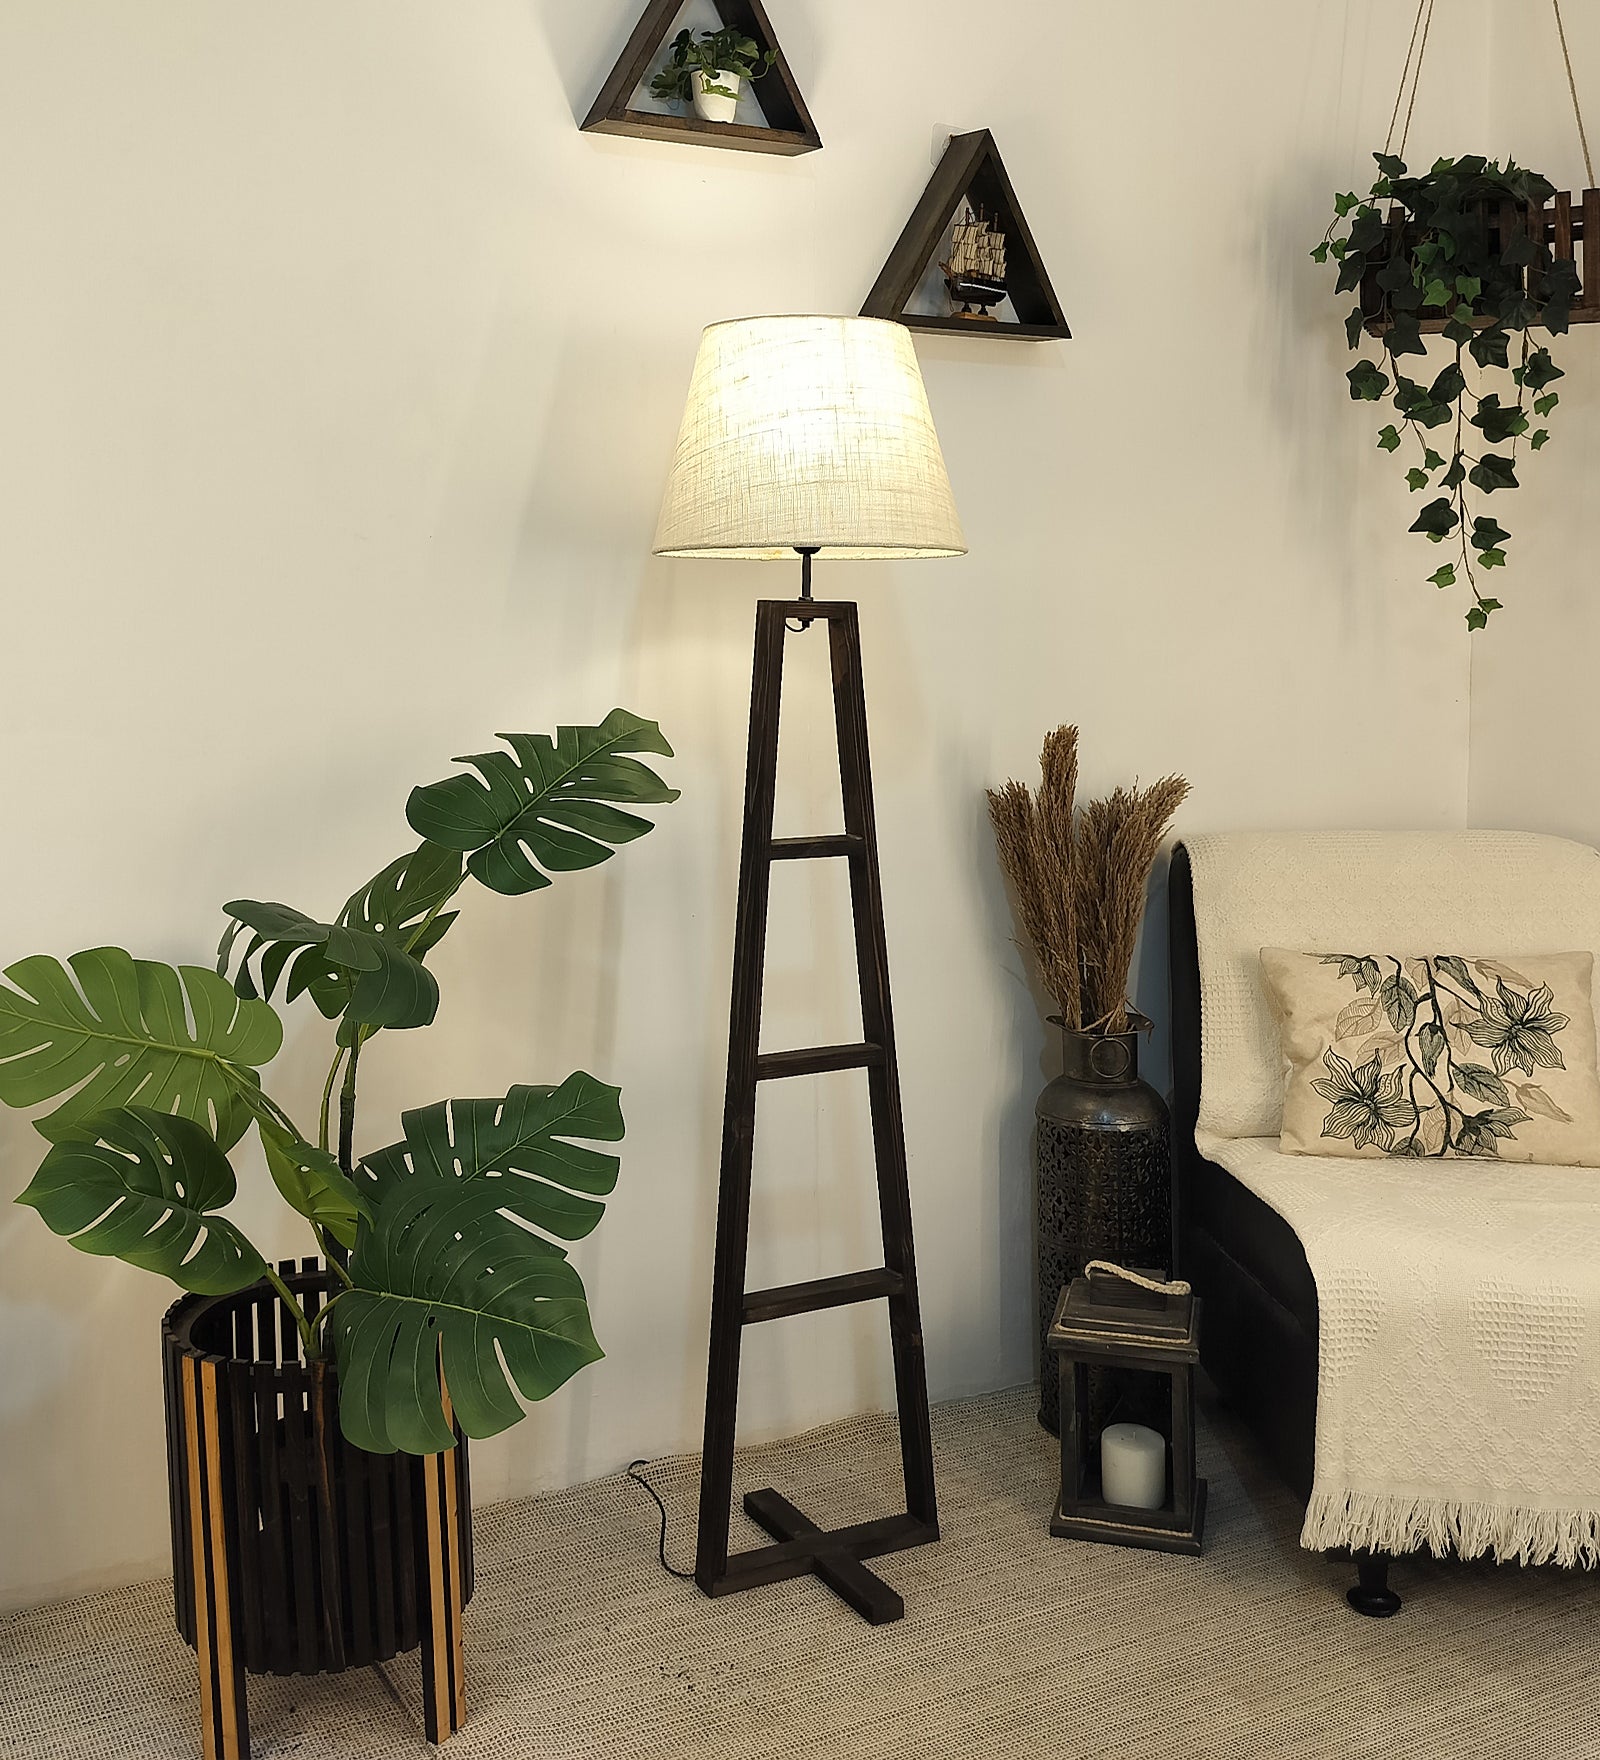 Salita Wooden Floor Lamp with Brown Base and Beige Fabric Lampshade (BULB NOT INCLUDED)